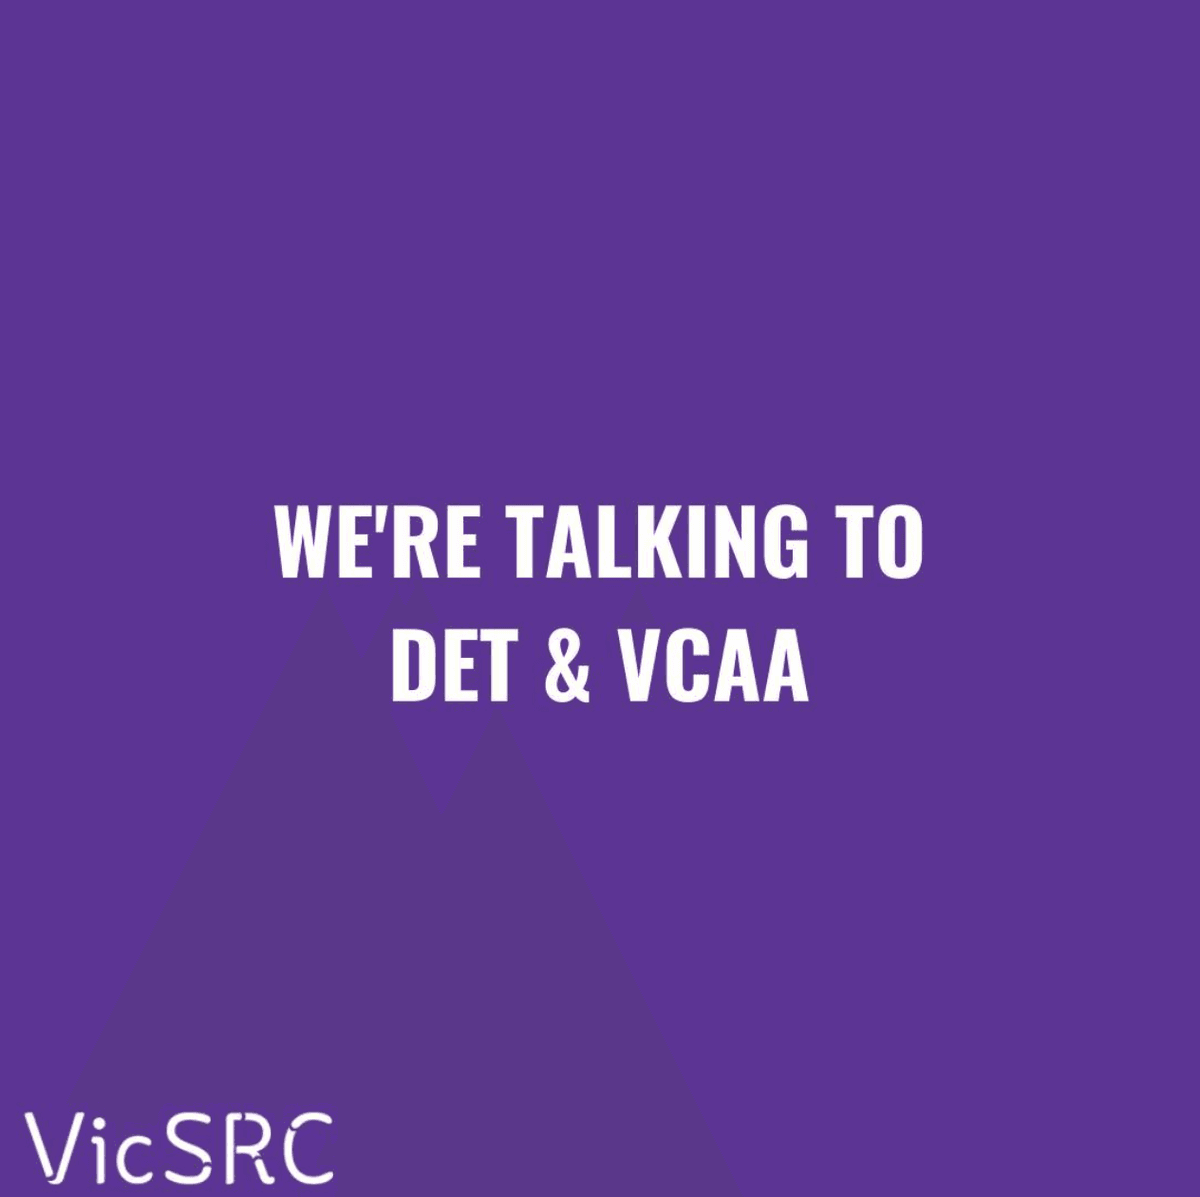 A graphic Instagram tile reads 'We're talking to DET & VCAA'.